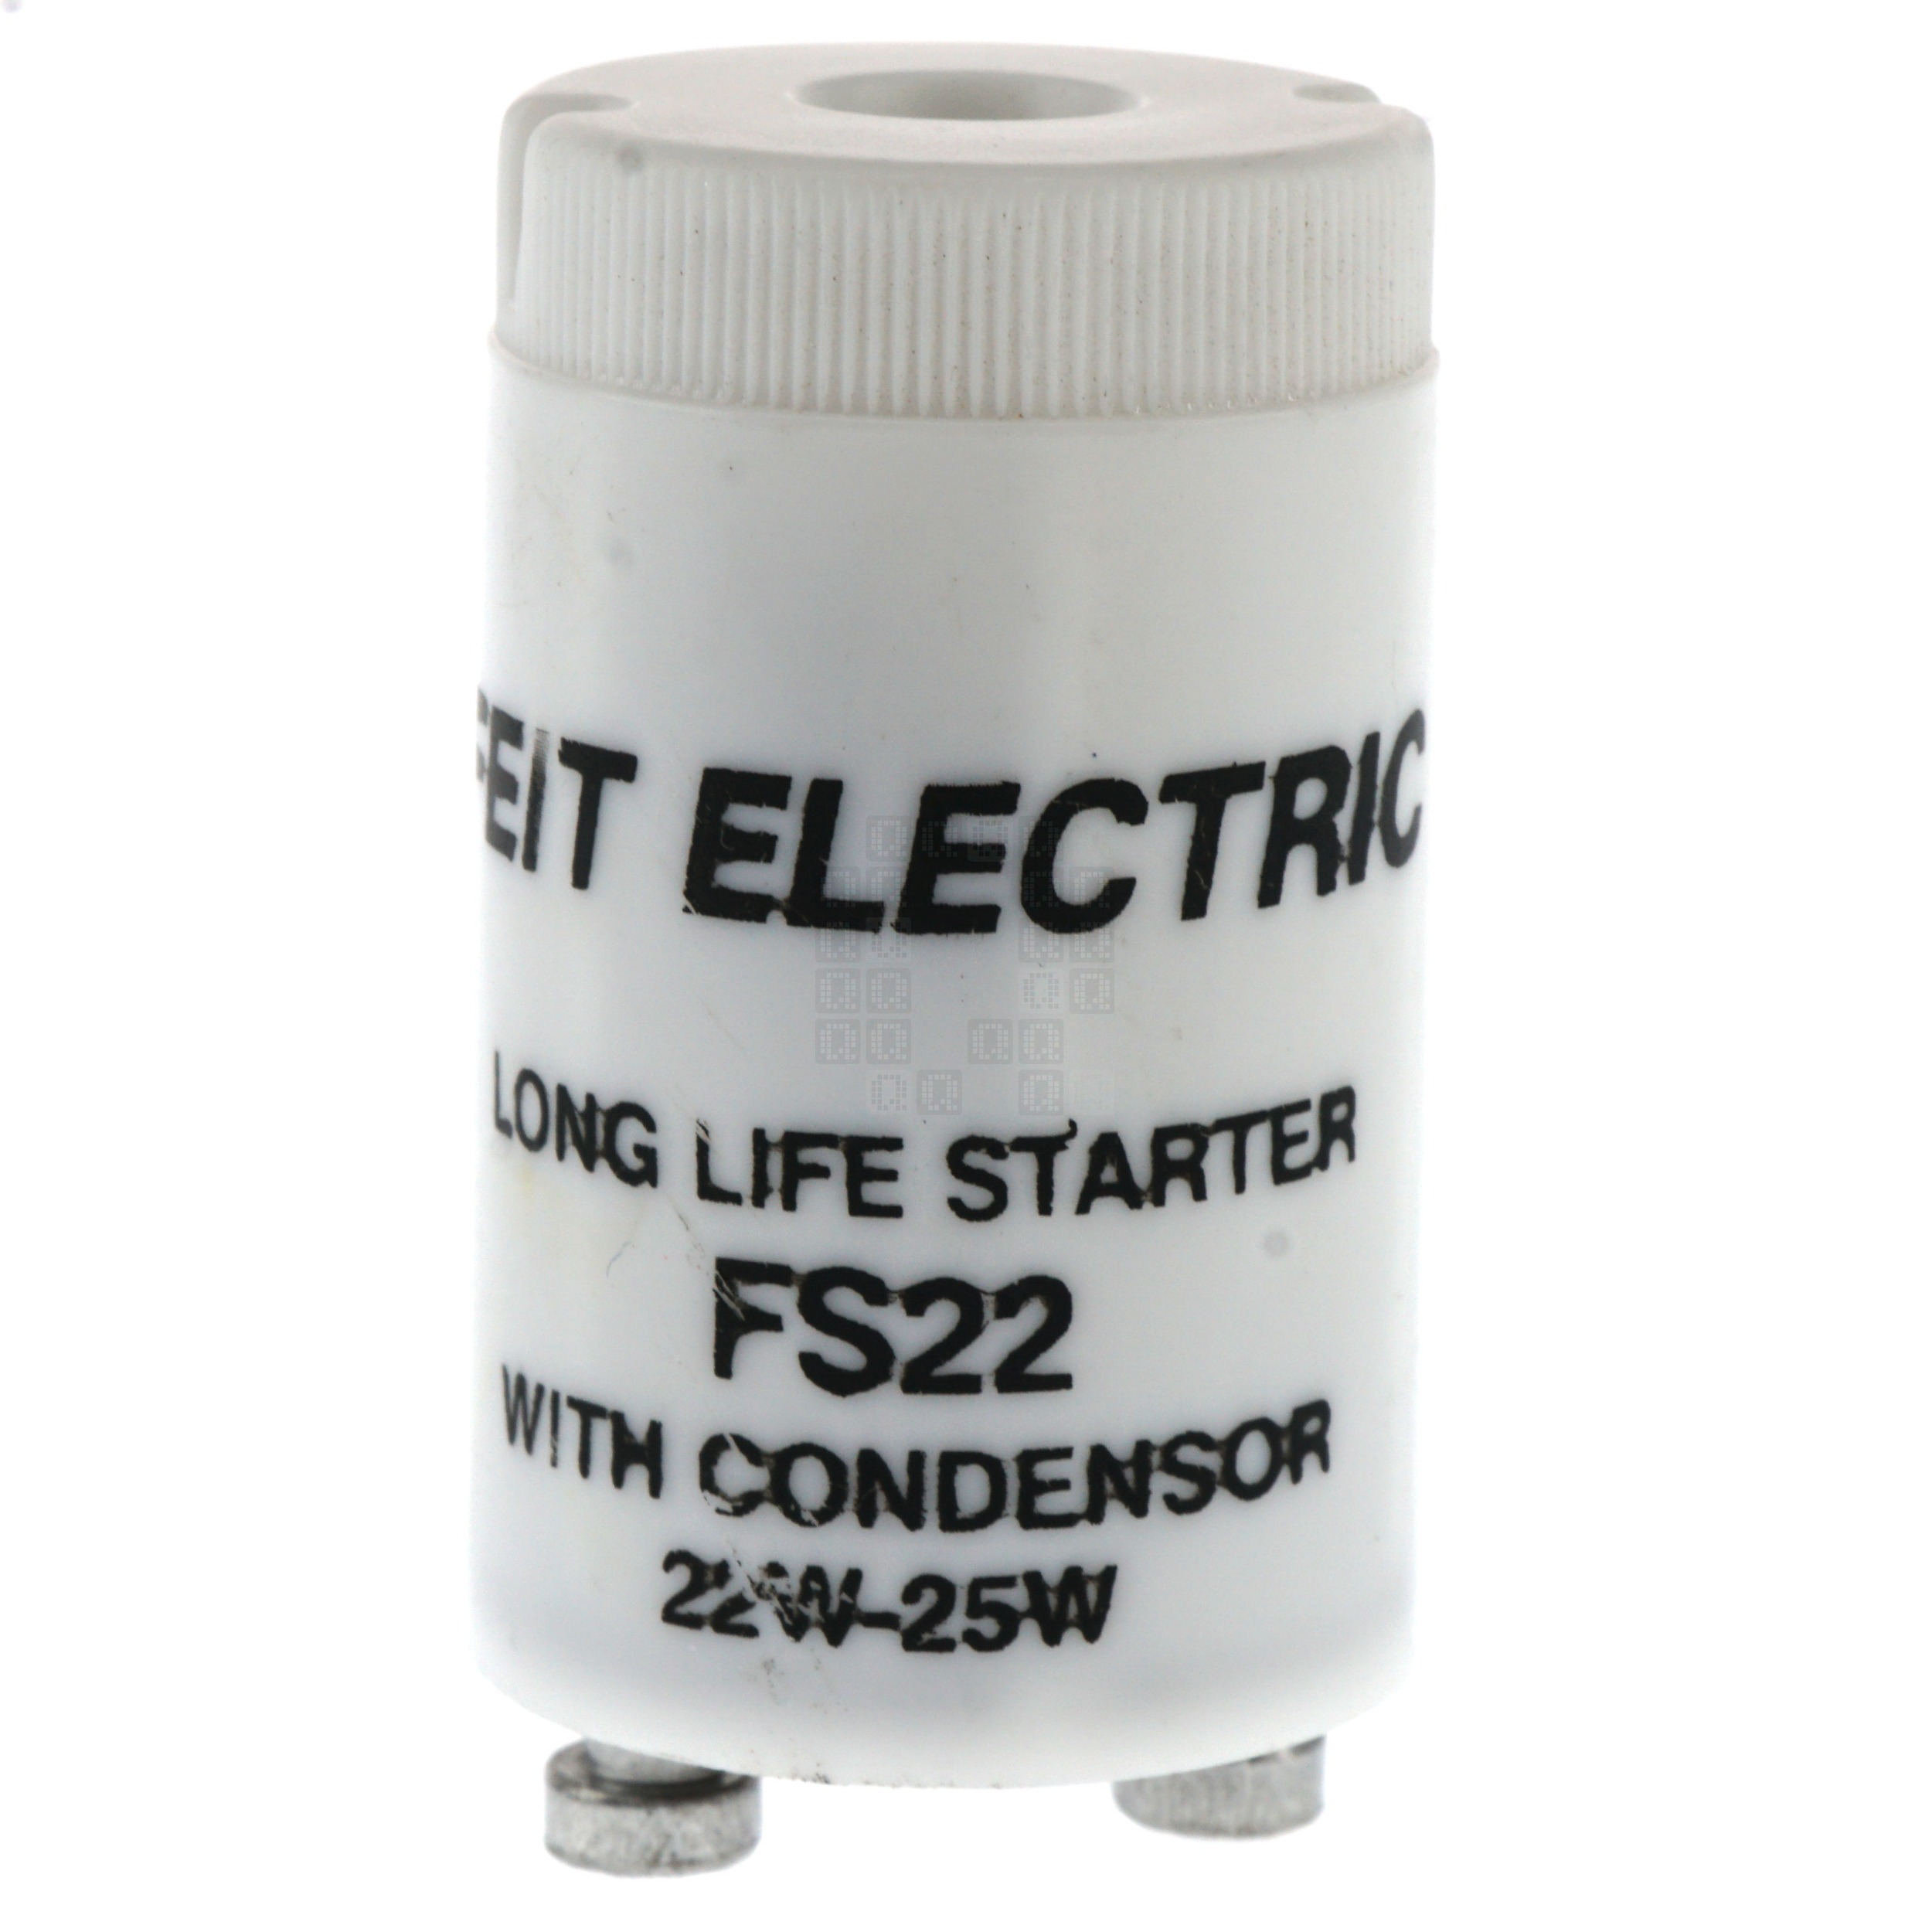 Feit Electric FS22 Fluorescent Long Life Starter with Condenser, 22-25W